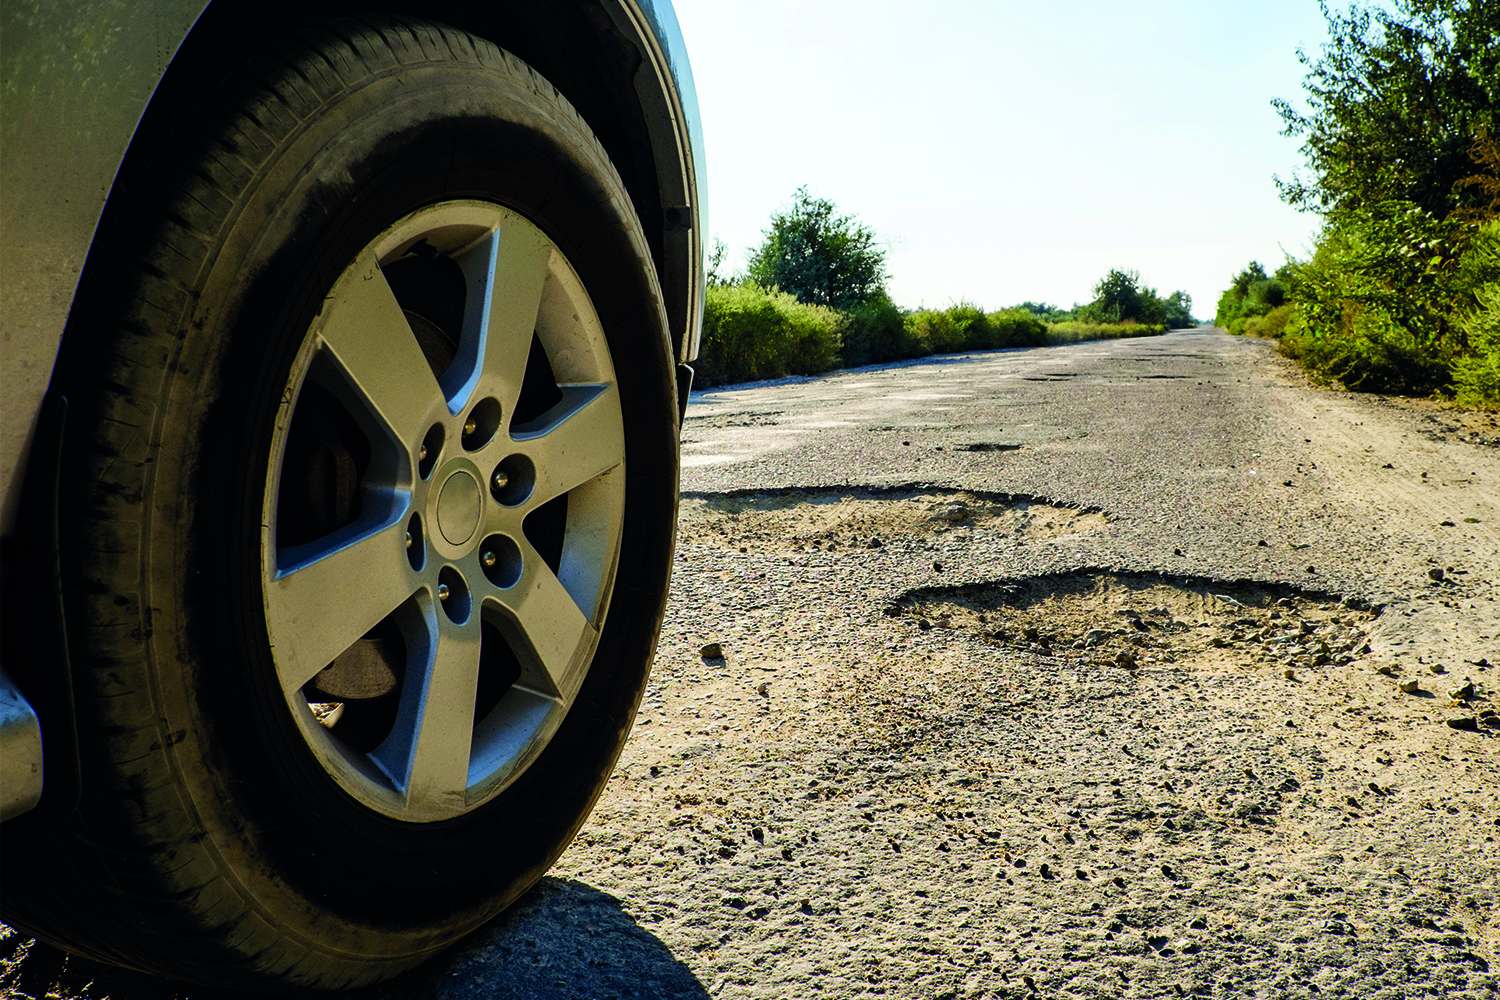 low-down close-up of car wheel and front of car driving along potholed lane